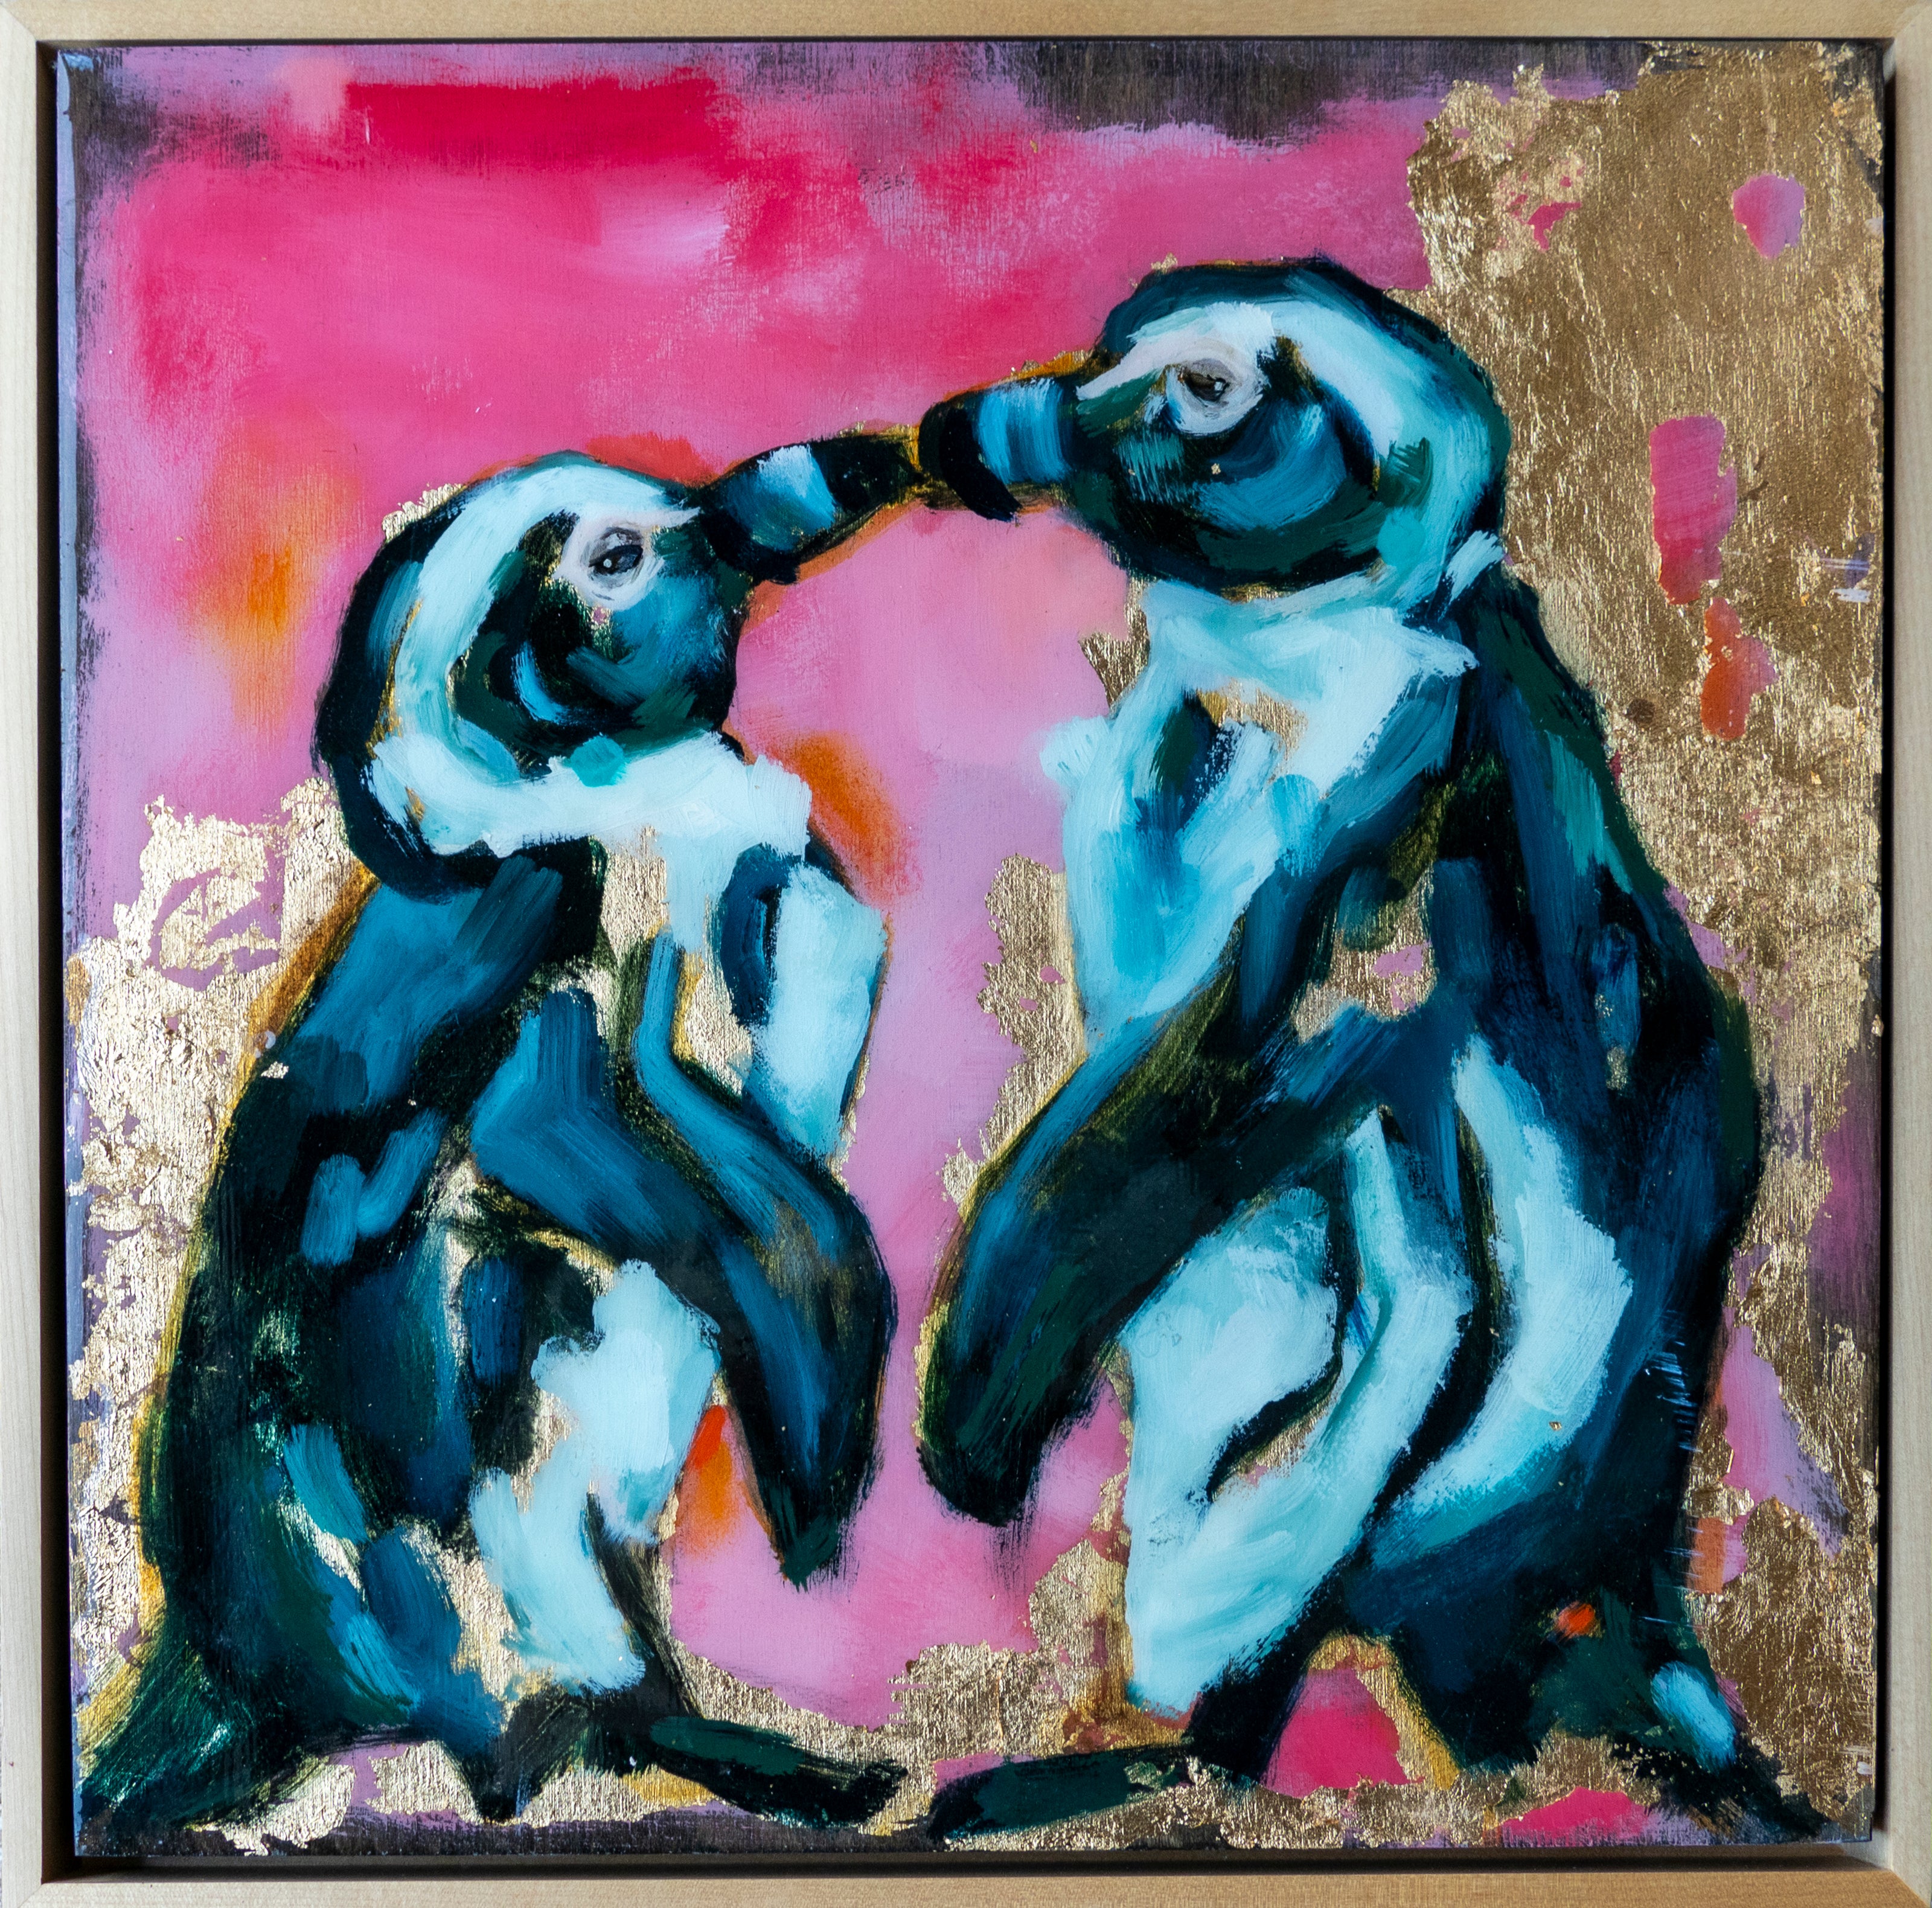 12.5"x12.5" painting of two Penguins is mixed media; using acrylic and oil, pencil, and gold leaf with glossy resin finish on surface; blues, pinks, and gold; artist Shaney Watters; had raw maple float frame